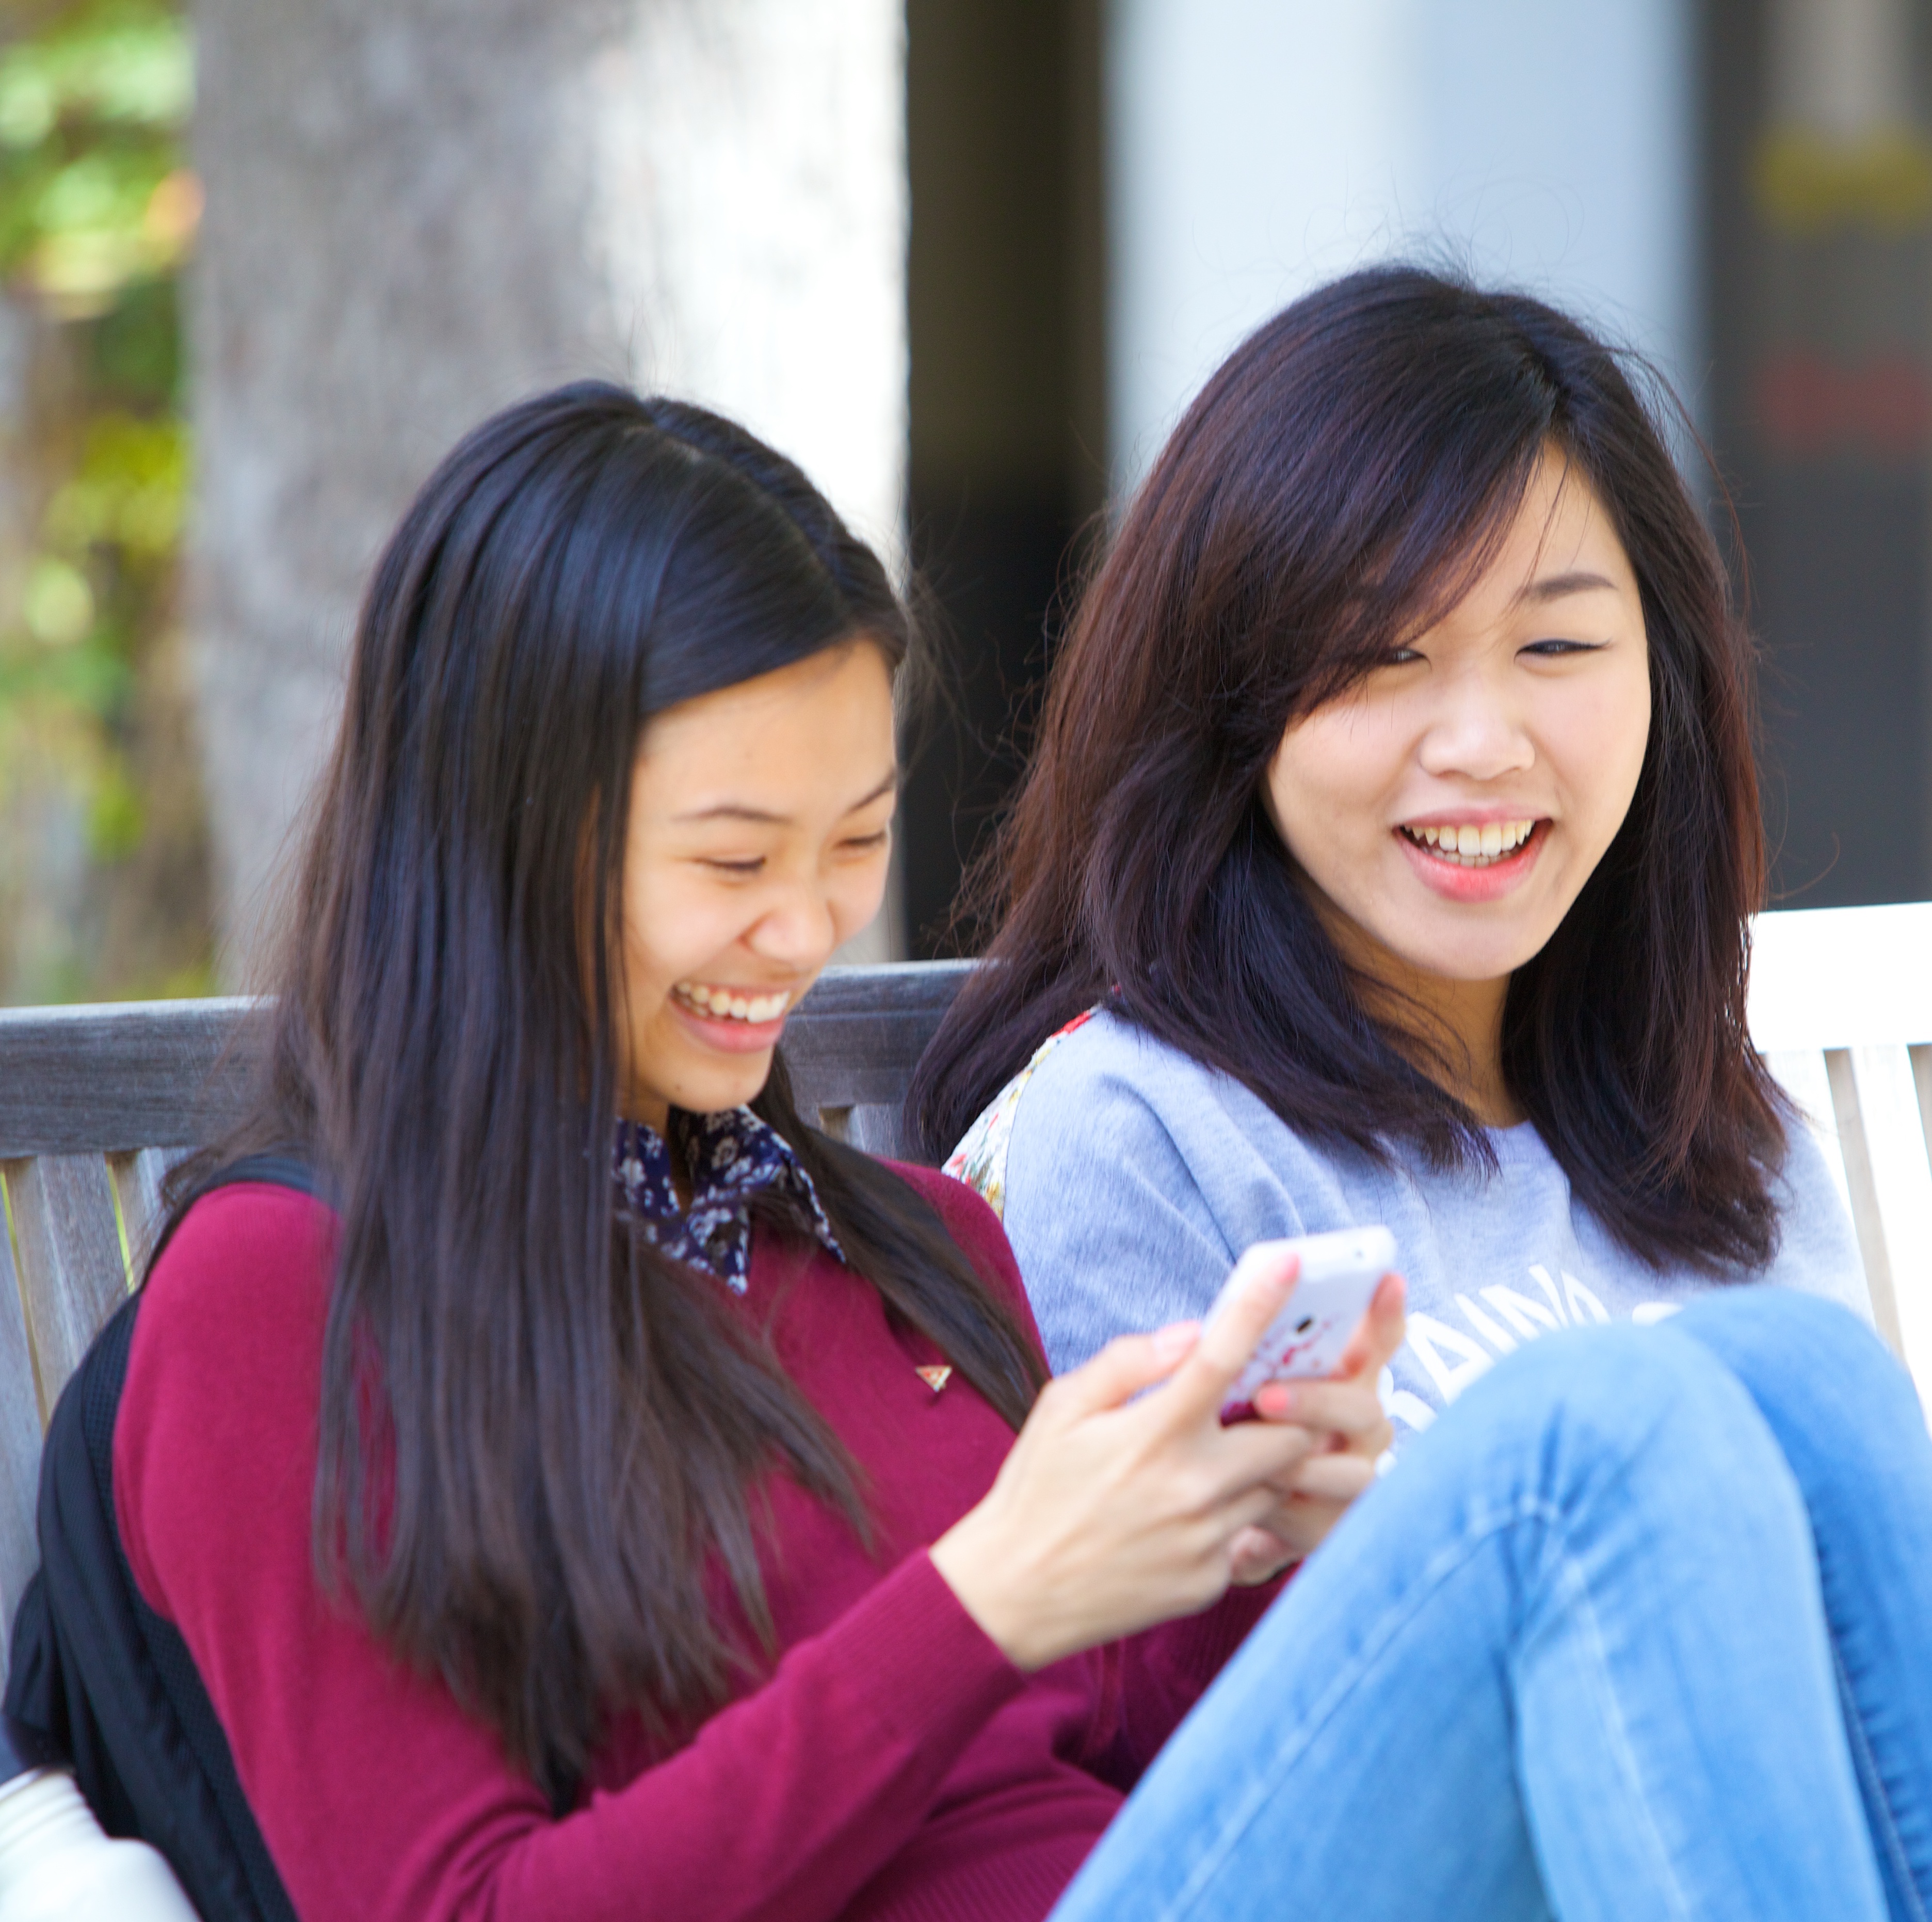 Two Women looking at a phone and smiling